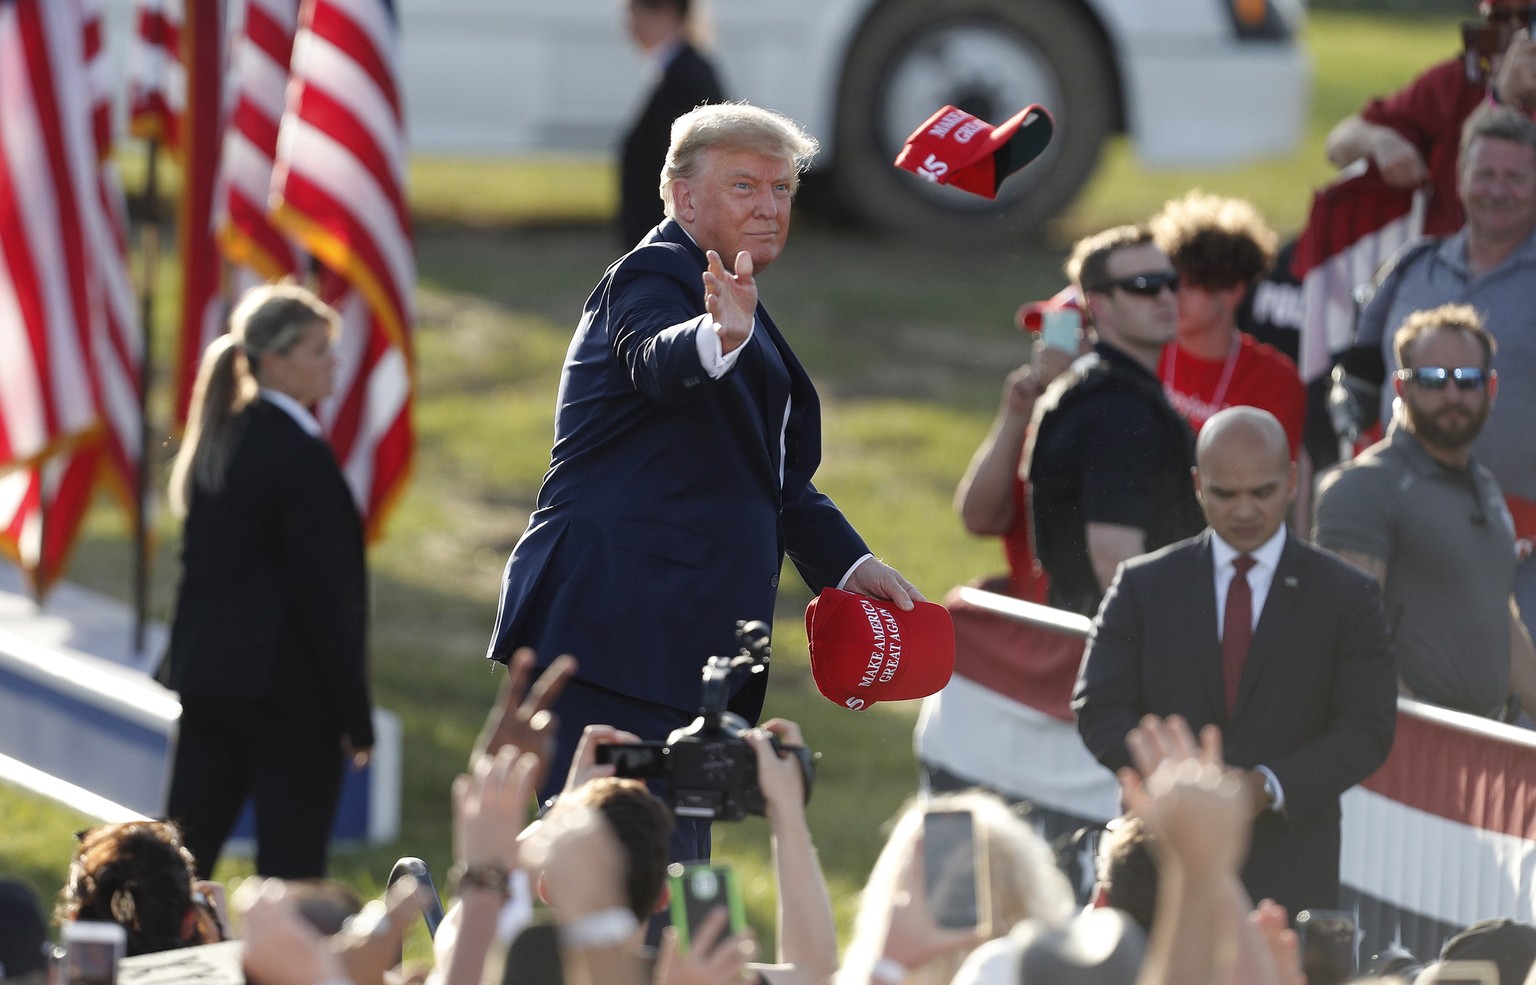 epa09905591 Former US President Donald Trump tosses MAGA hats to the crowd as he arrives for a Save America rally at the Delaware County Fairgrounds in Delaware, Ohio, USA, 23 April 2022. EPA/DAVID MA ...